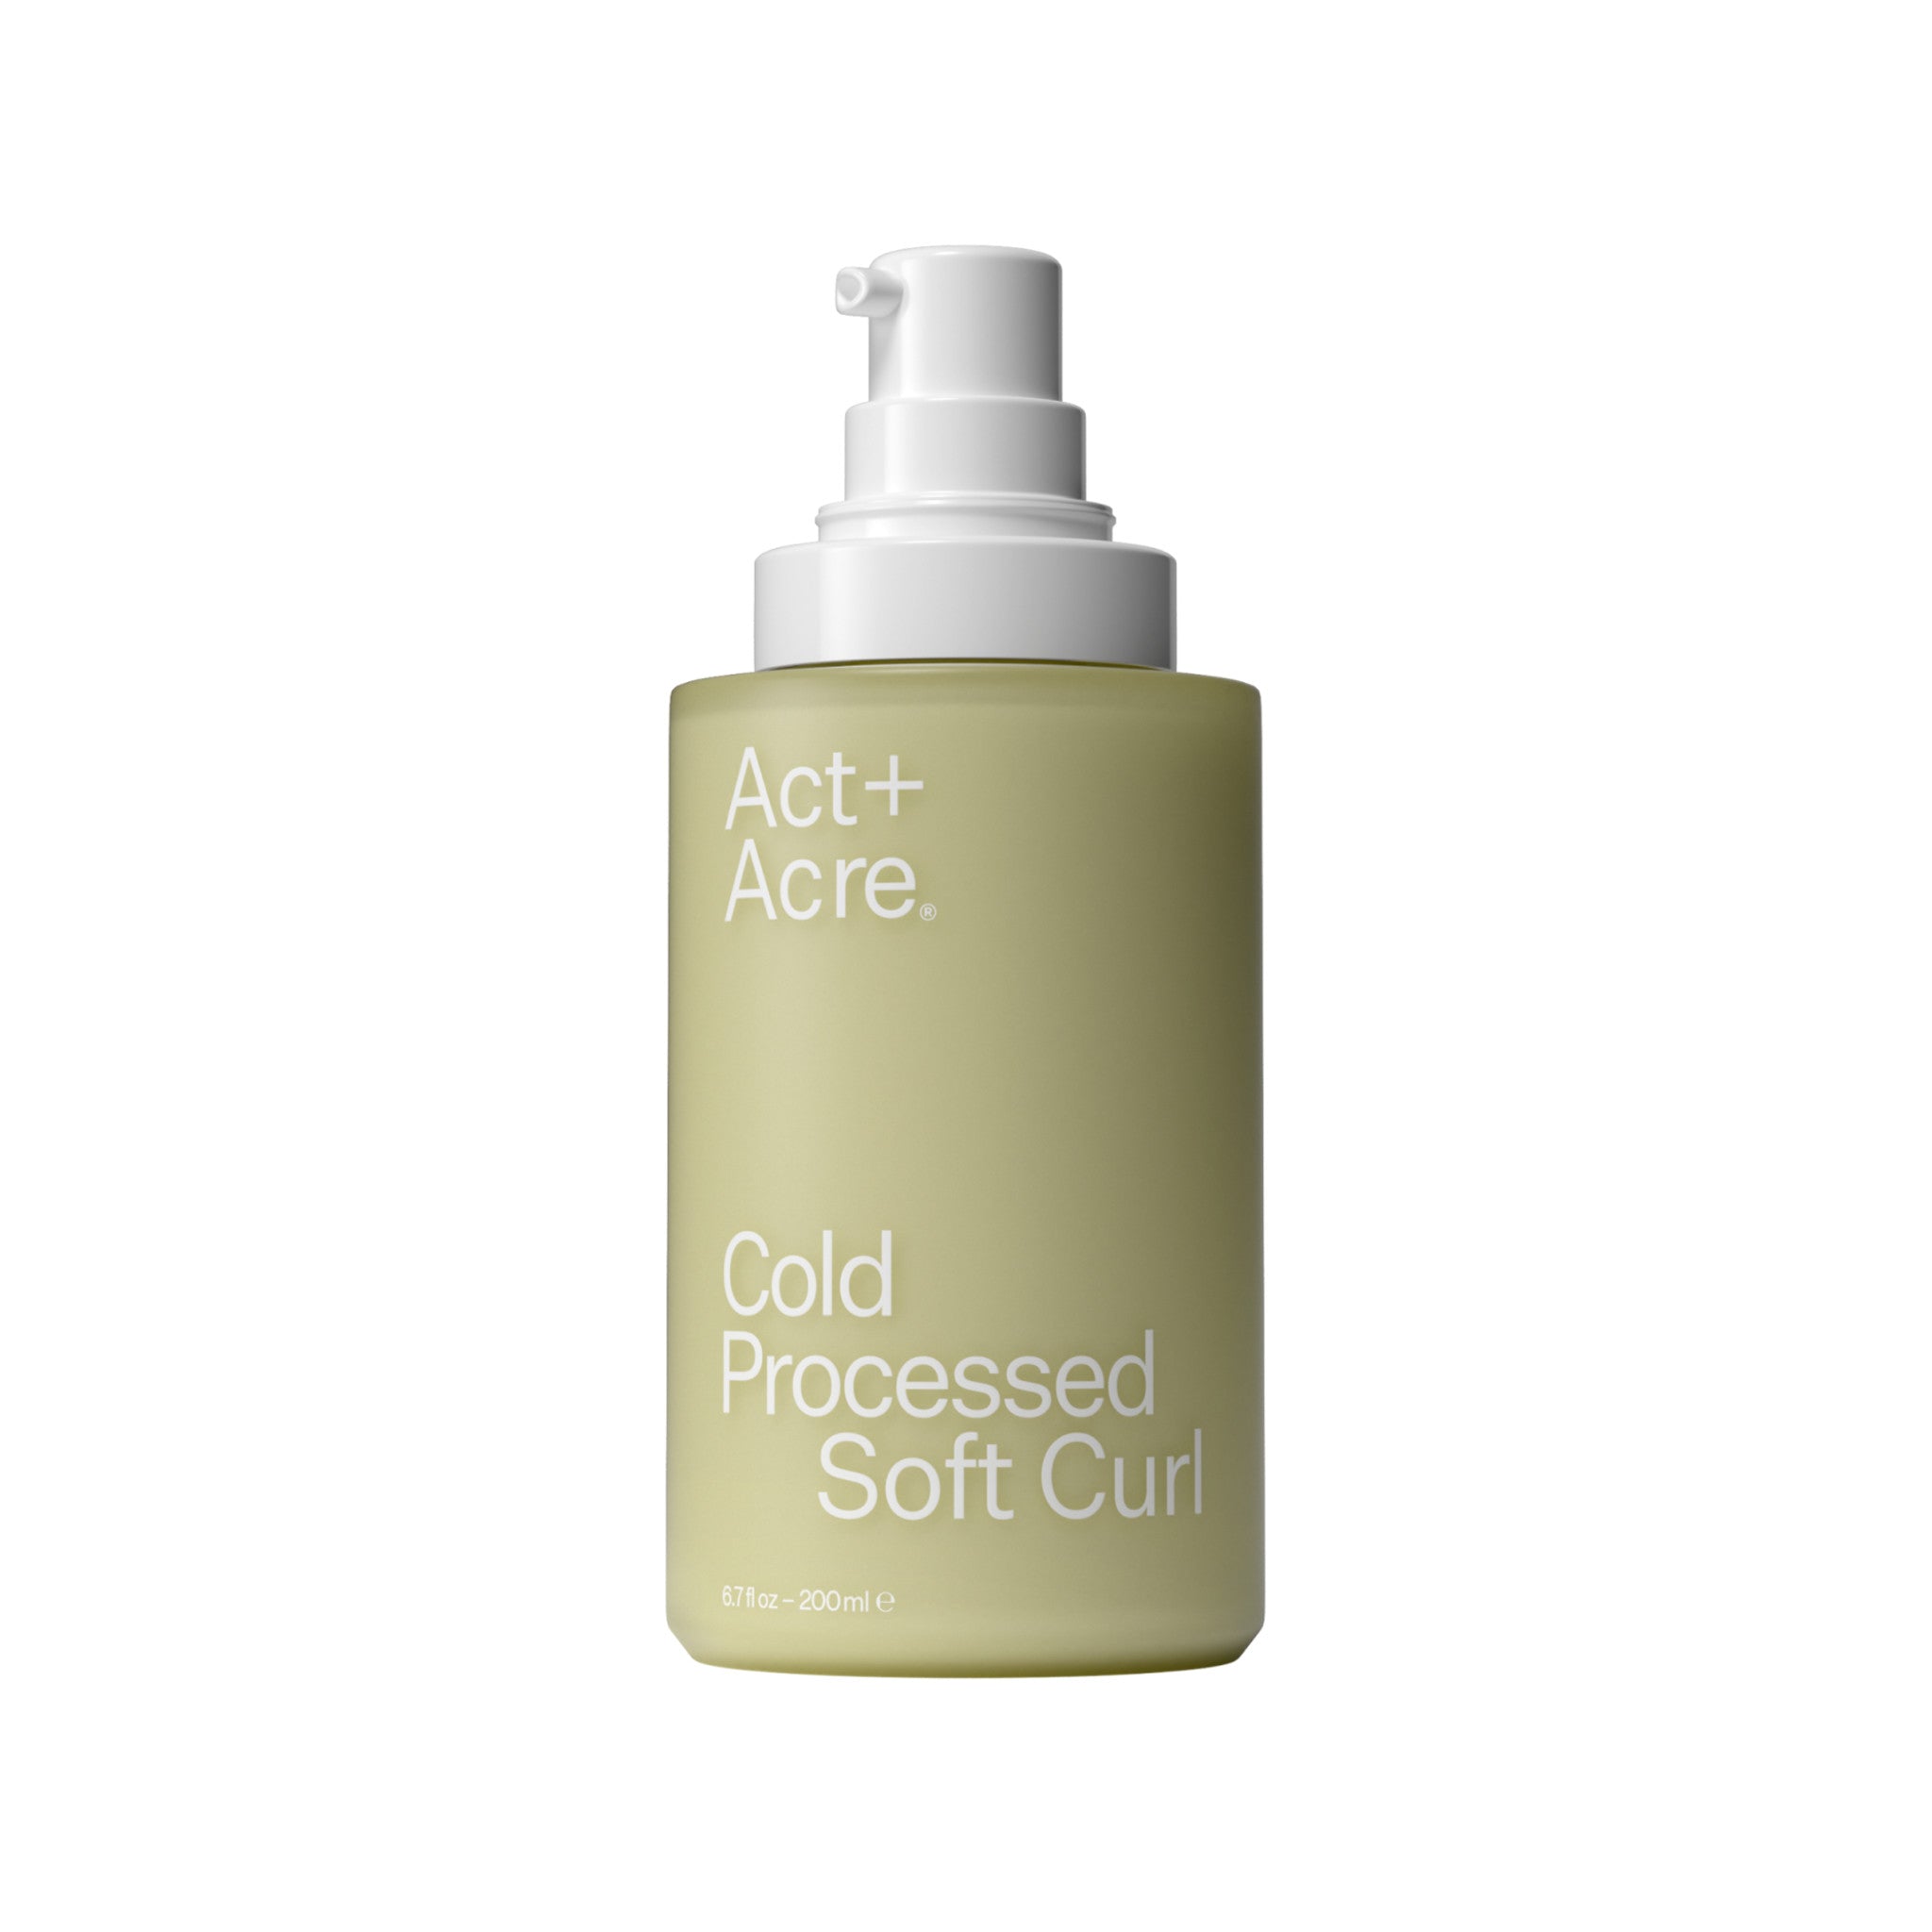 Cold Processed Soft Curl Lotion main image.